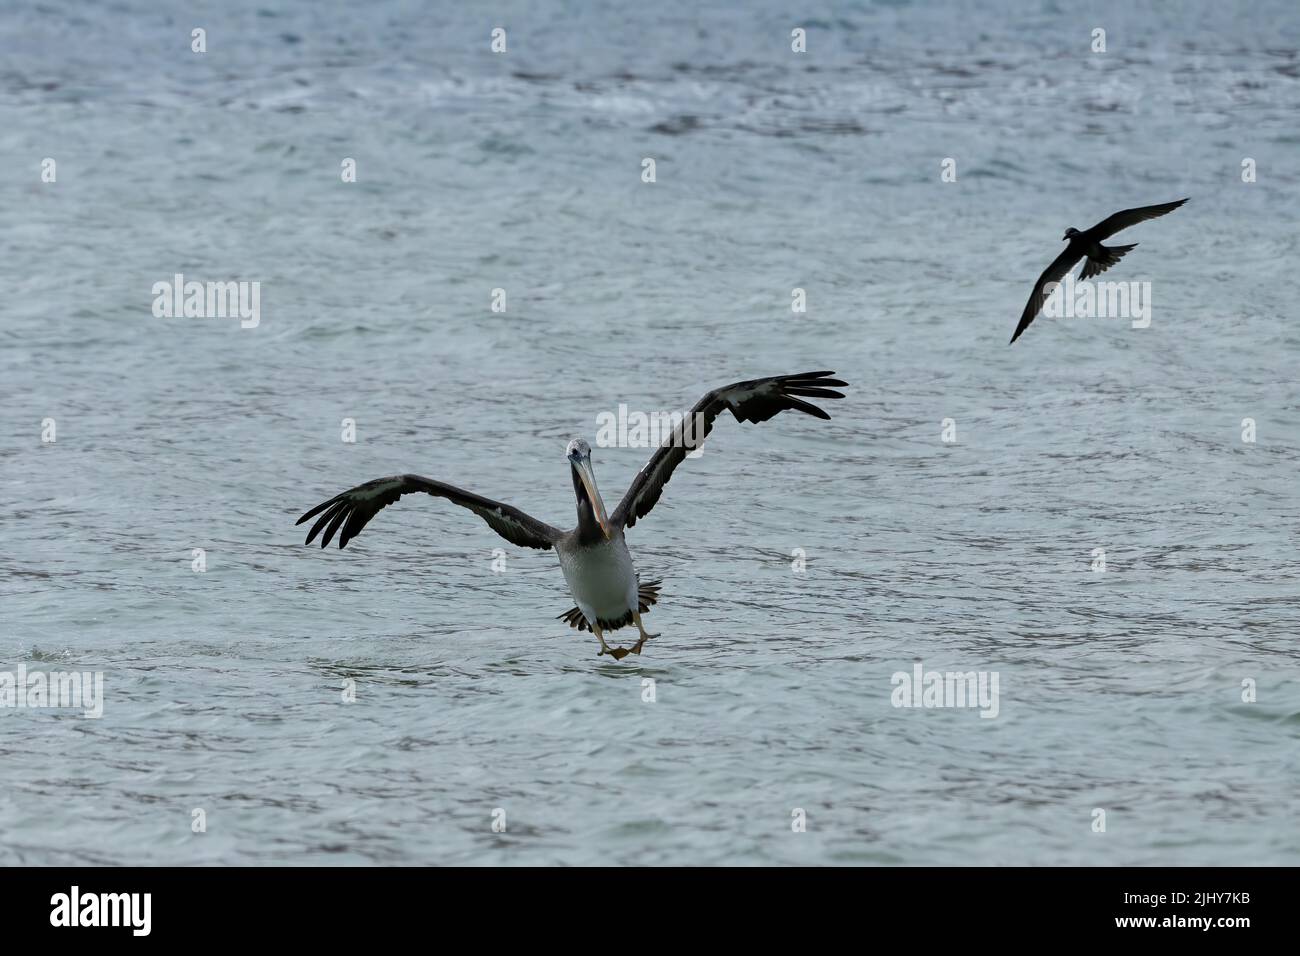 A Peruvian Pelican comes in to land on the water as an Inca Tern flies by in Pan de Azucar National Park in Chile. Stock Photo